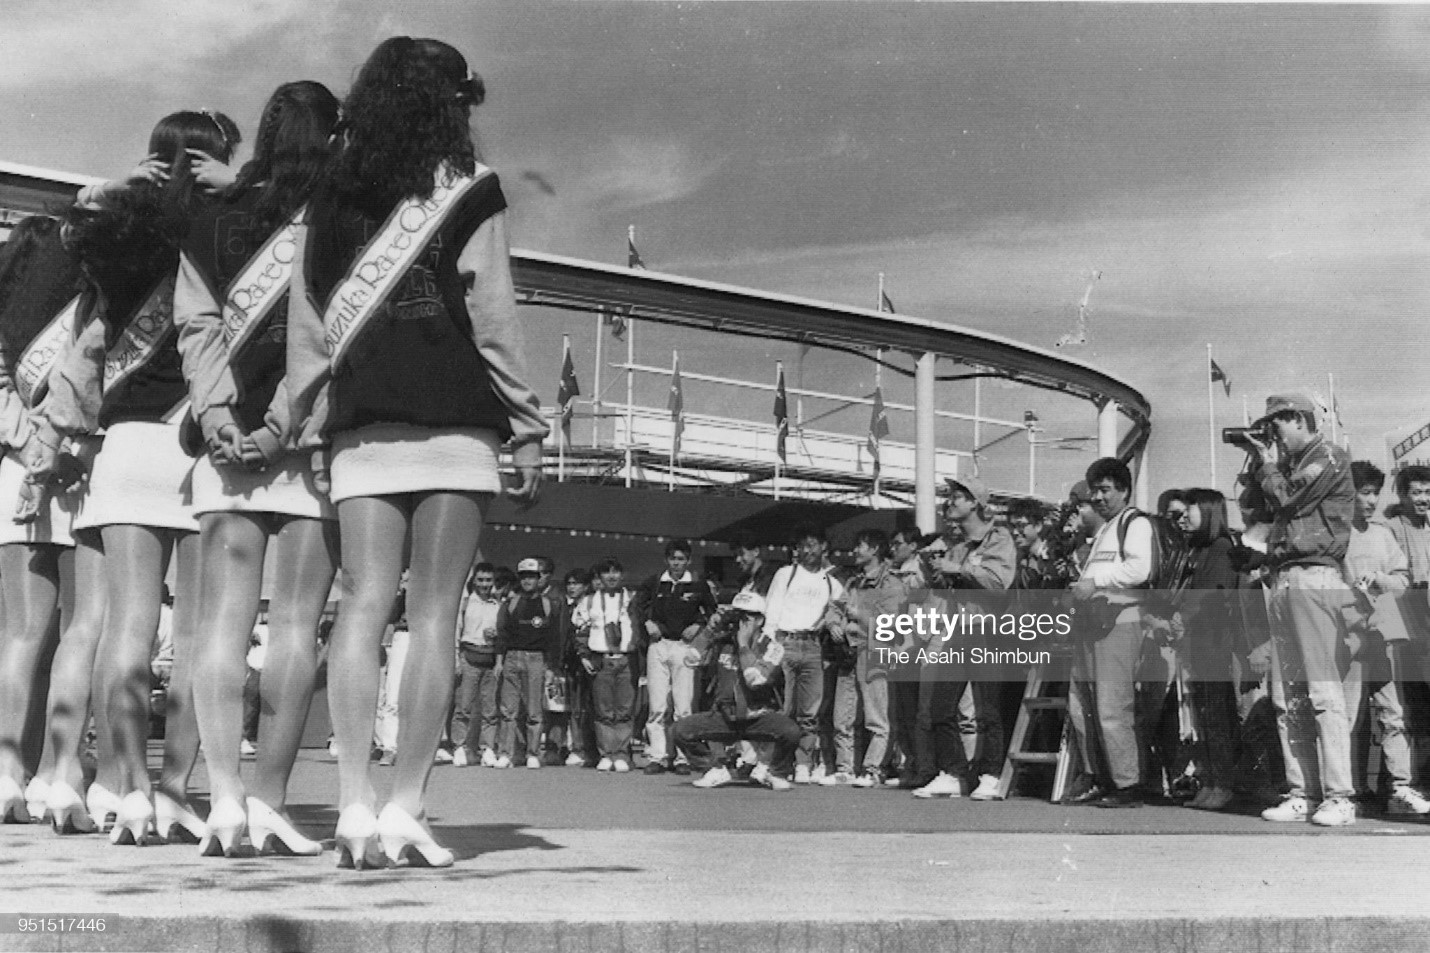 Grid girls pose for photographs during the qualifying of F1 Japanese Grand Prix at Suzuka Circuit on October 19, 1990 in Suzuka, Mie, Japan. 